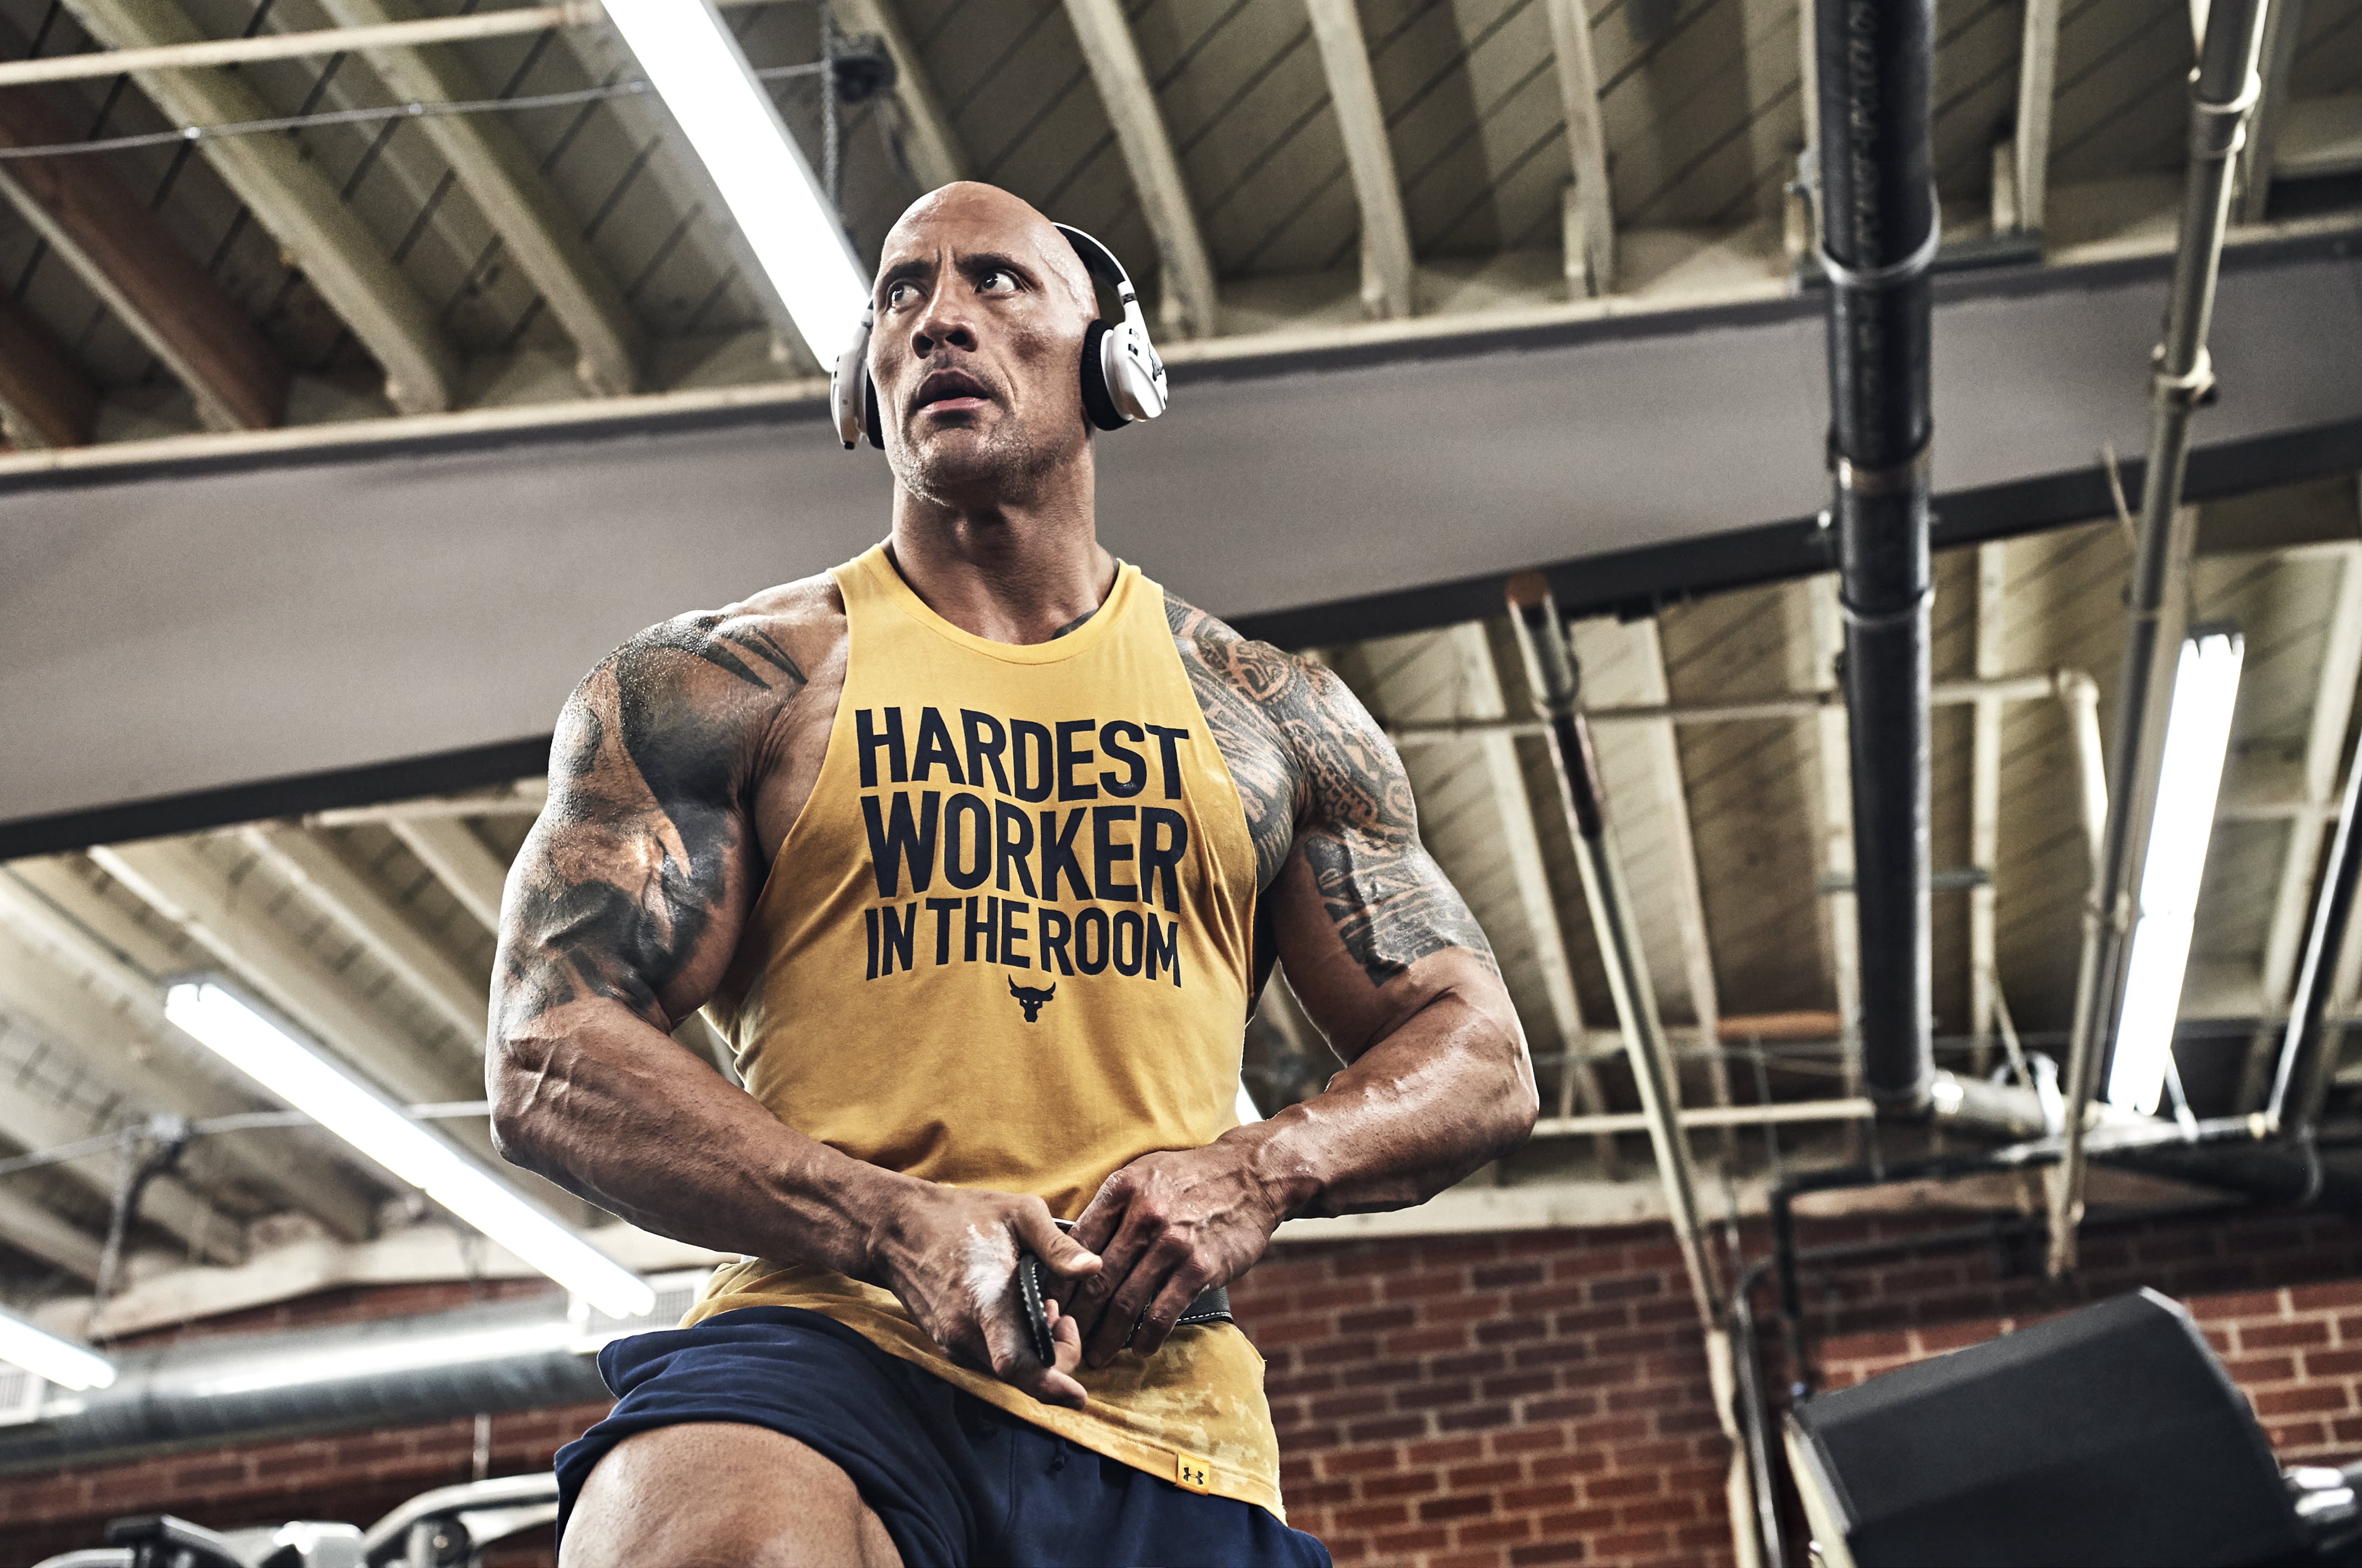 Zielig Onvoorziene omstandigheden nooit Dwayne Johnson just dropped his latest Project Rock ad campaign